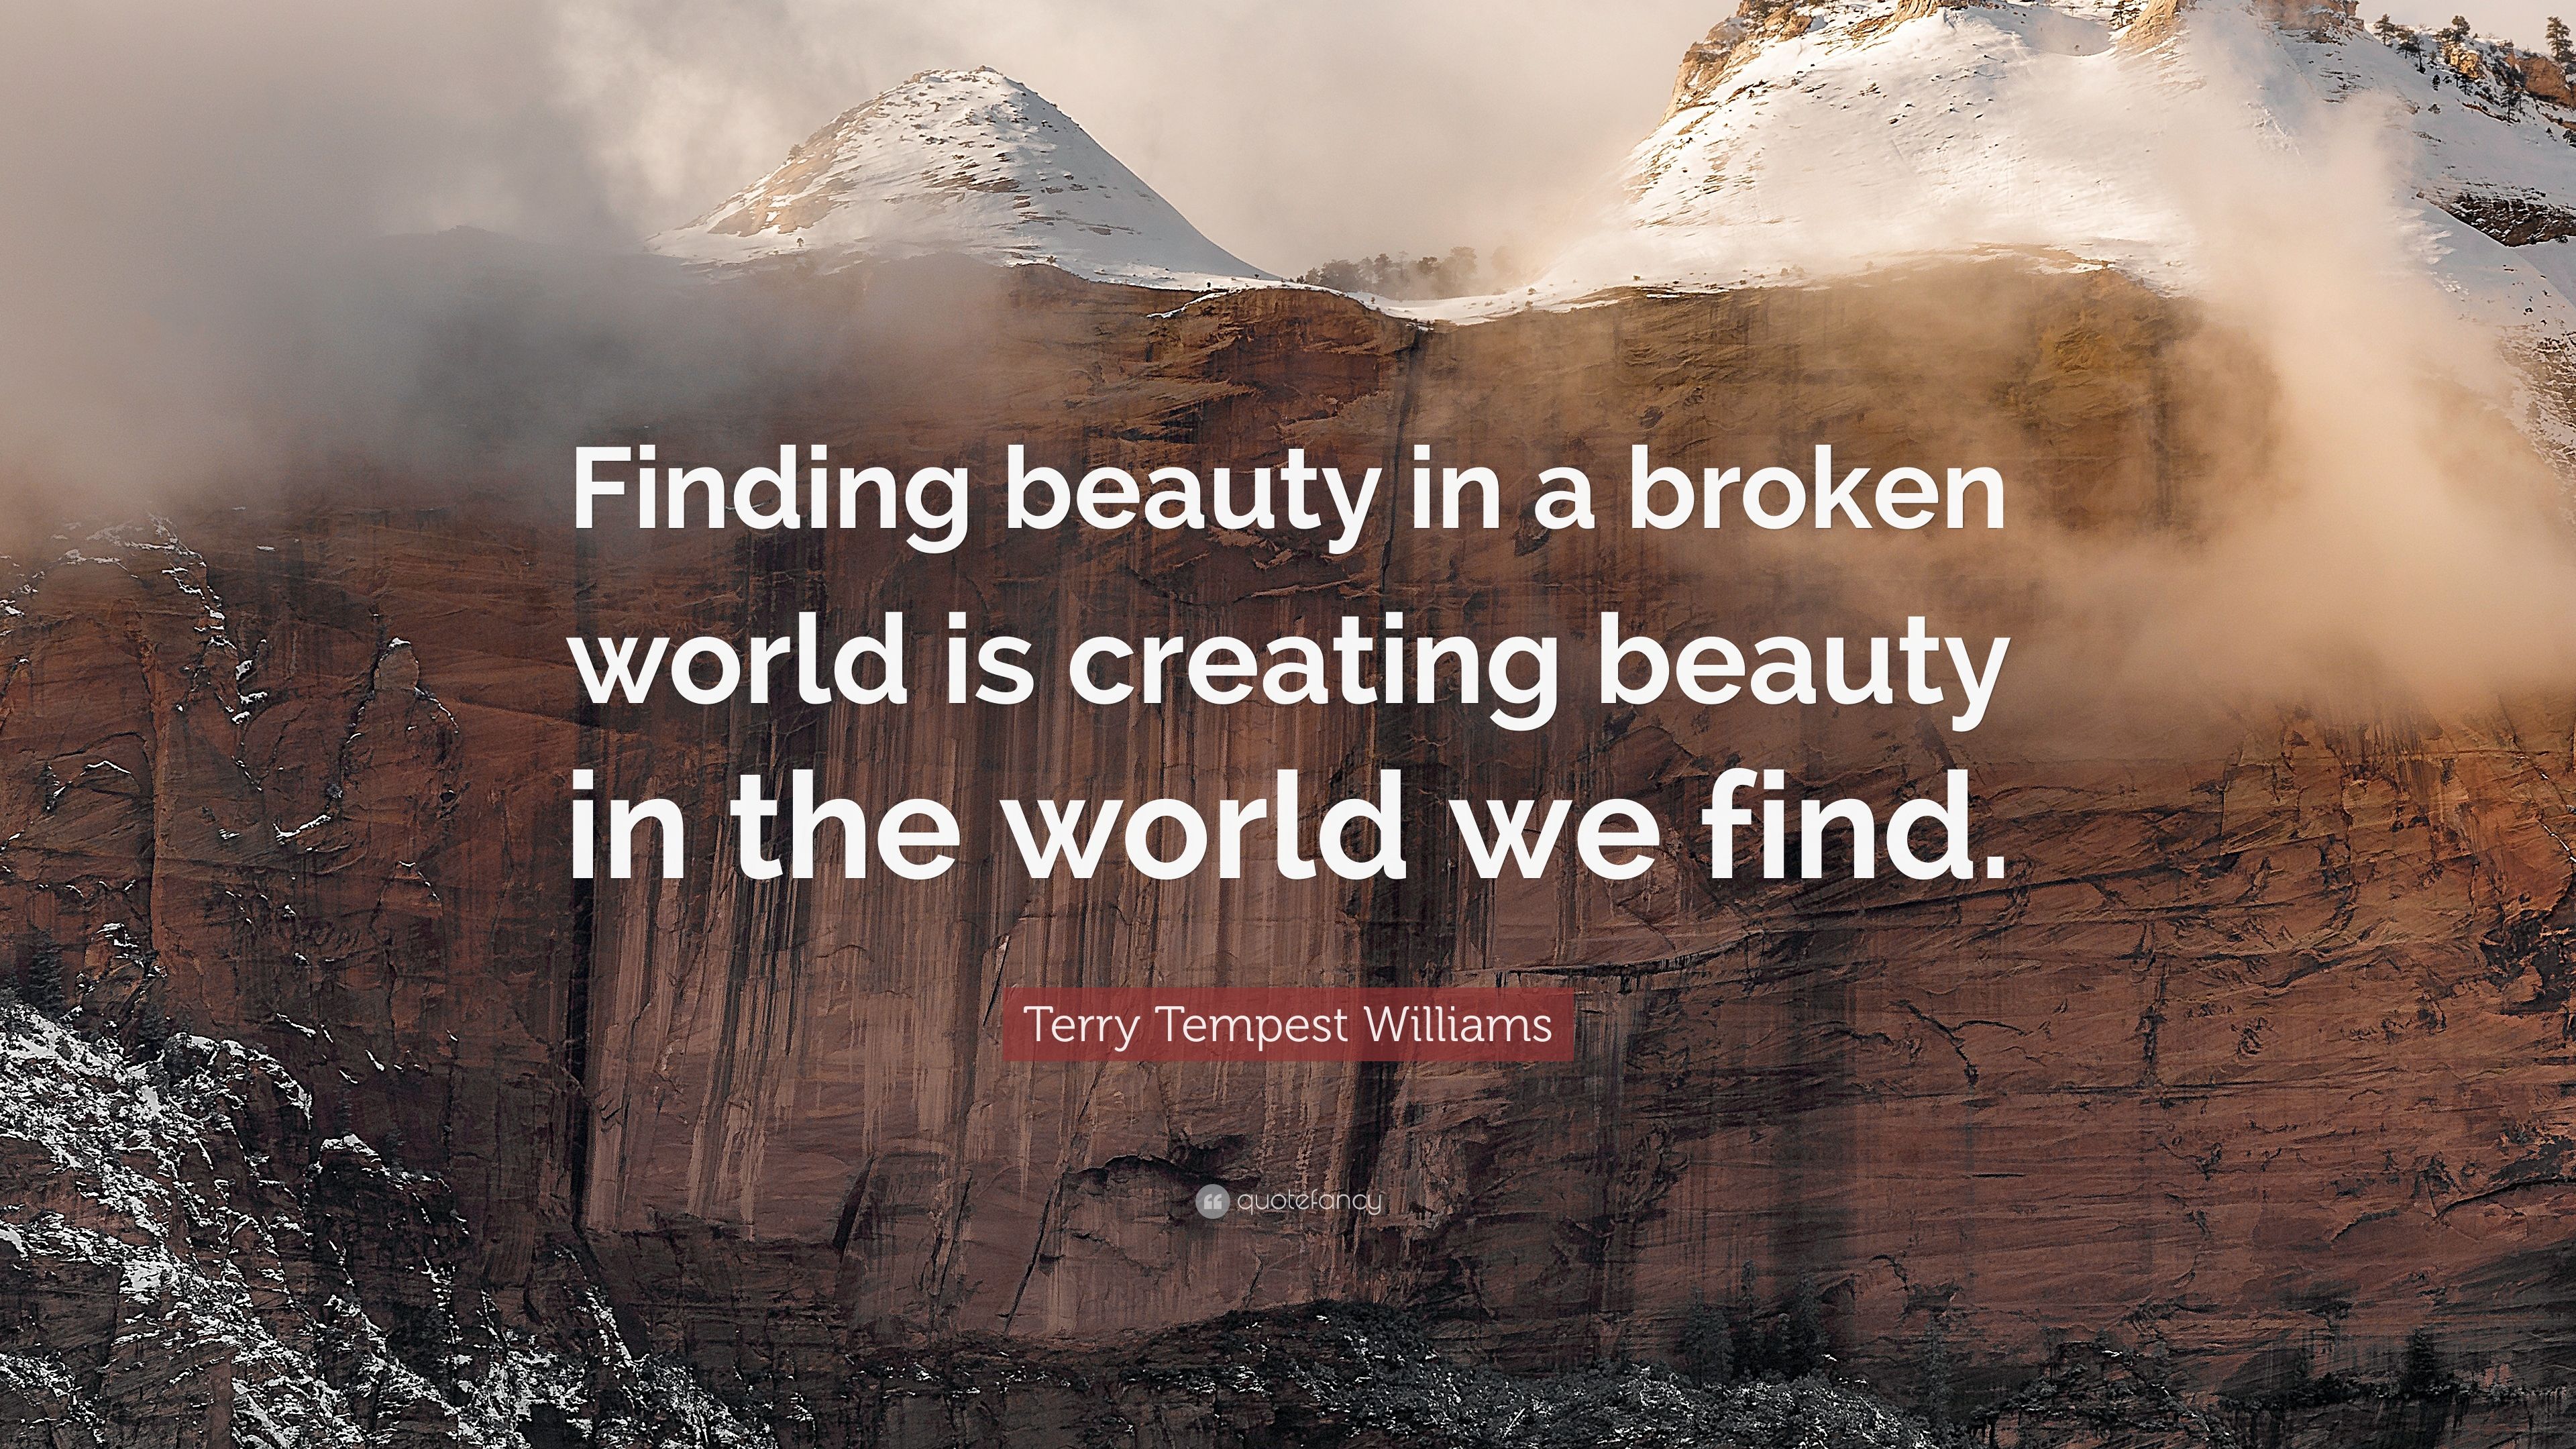 Terry Tempest Williams Quote: “Finding beauty in a broken world is ...